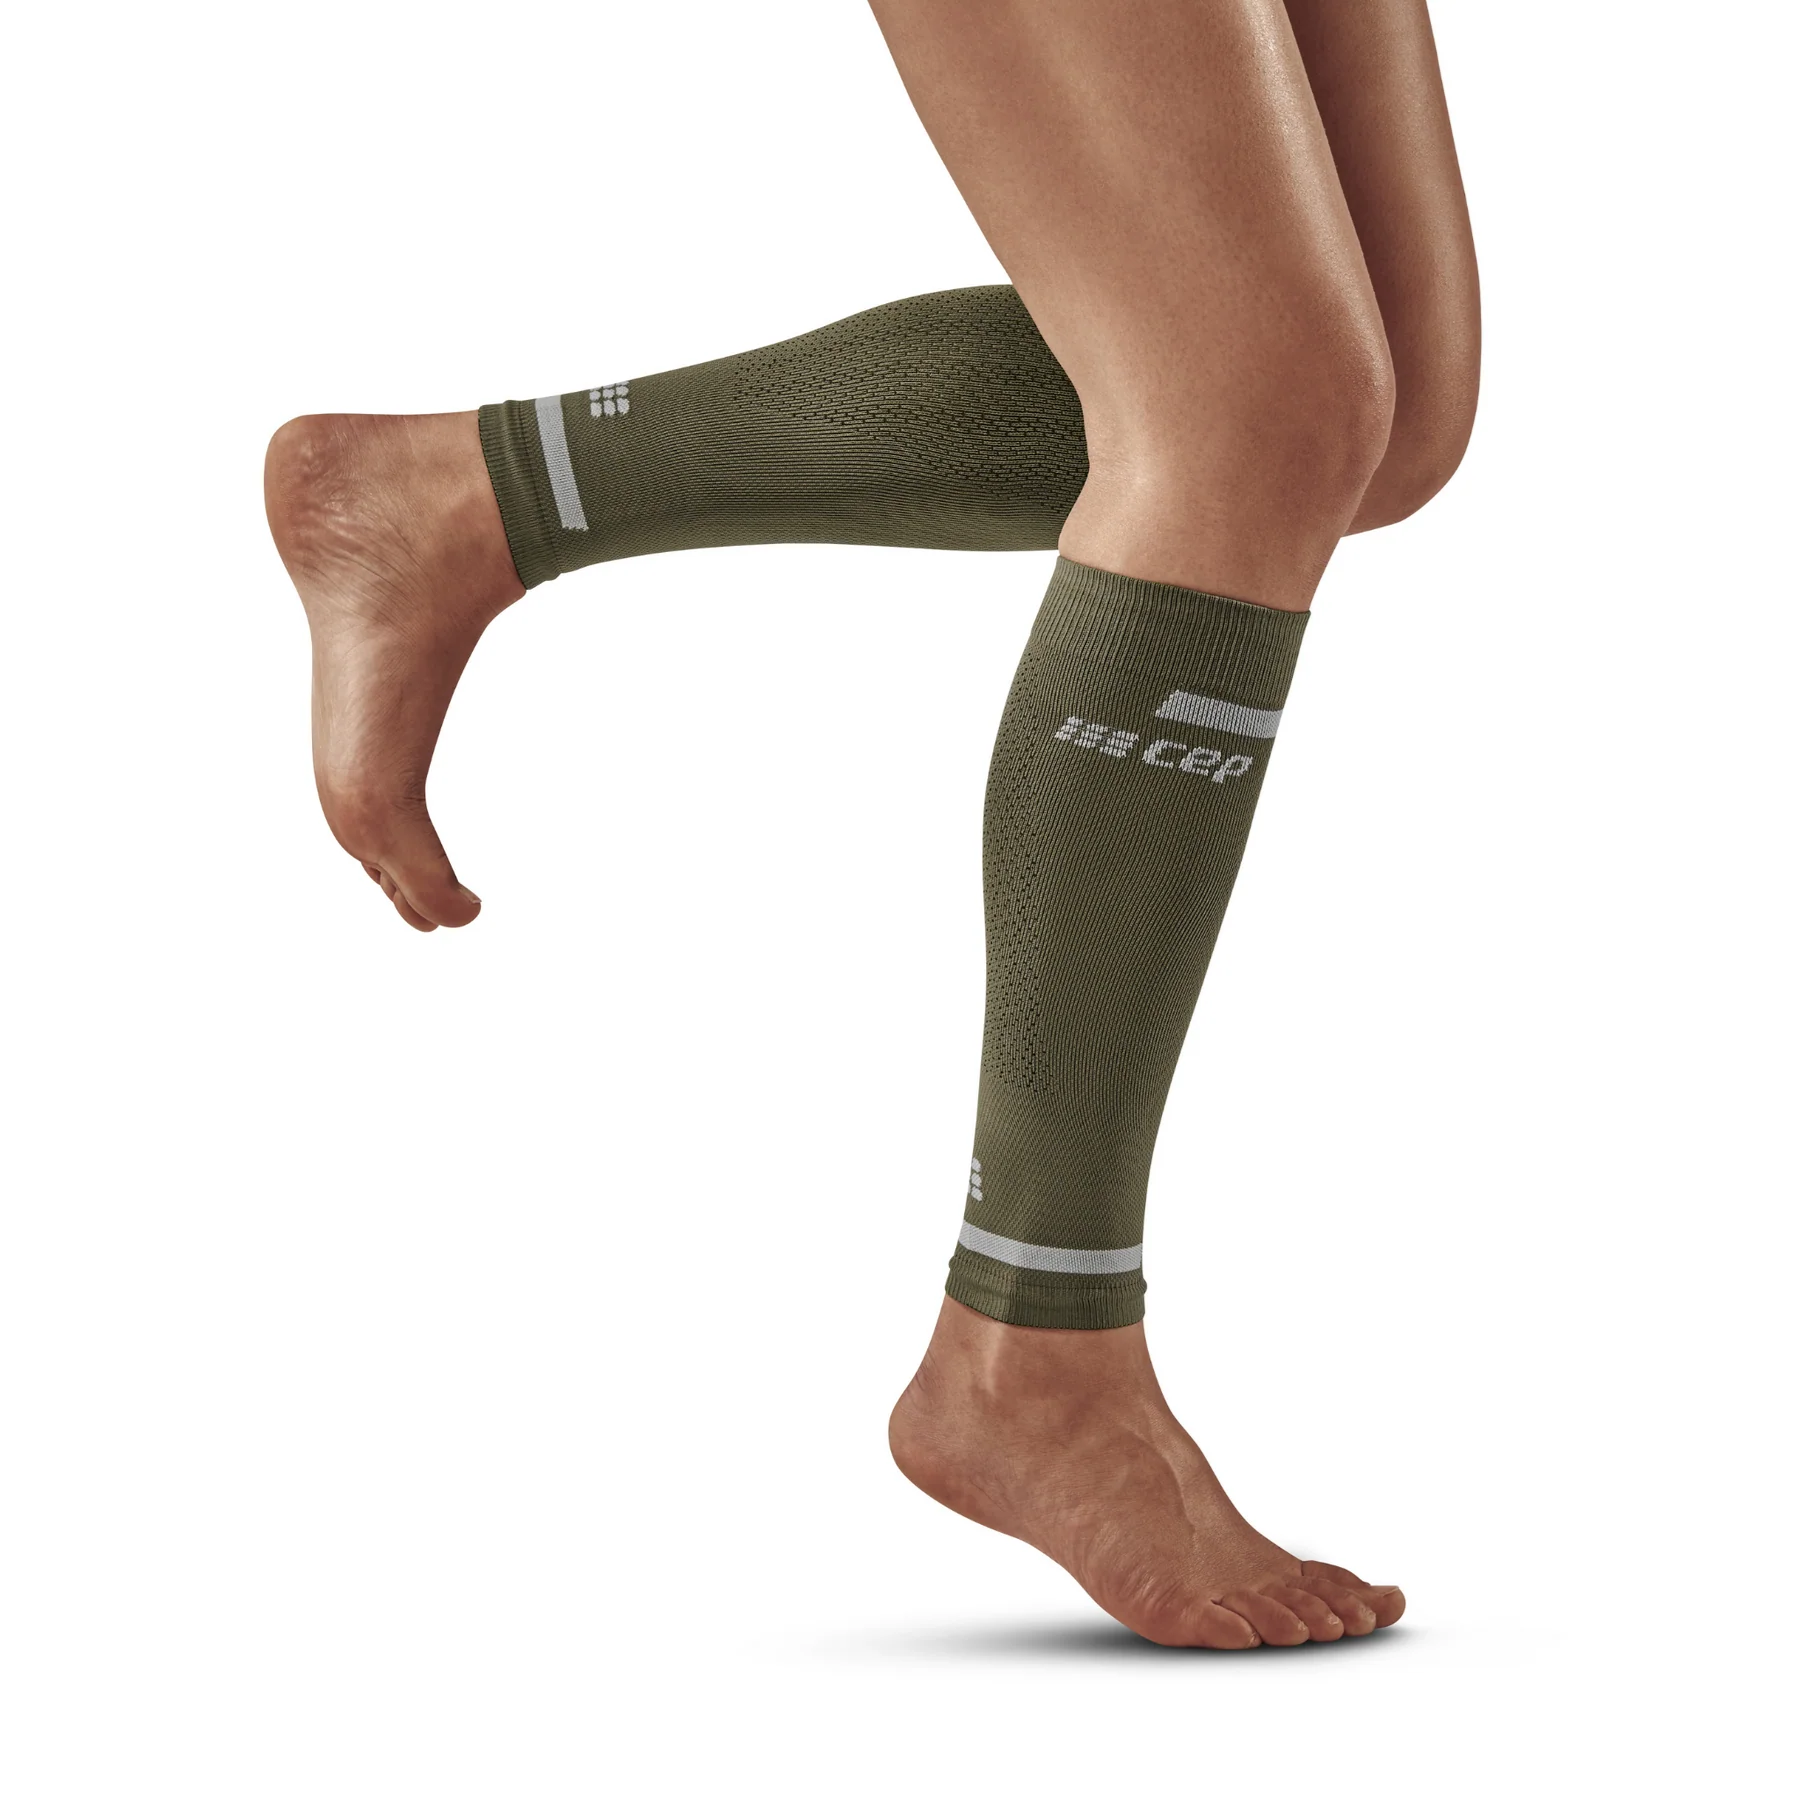 CEP - Women's THE RUN COMPRESSION CALF SLEEVES, stabilizing calf  compression sleeves for running, calf support, Black